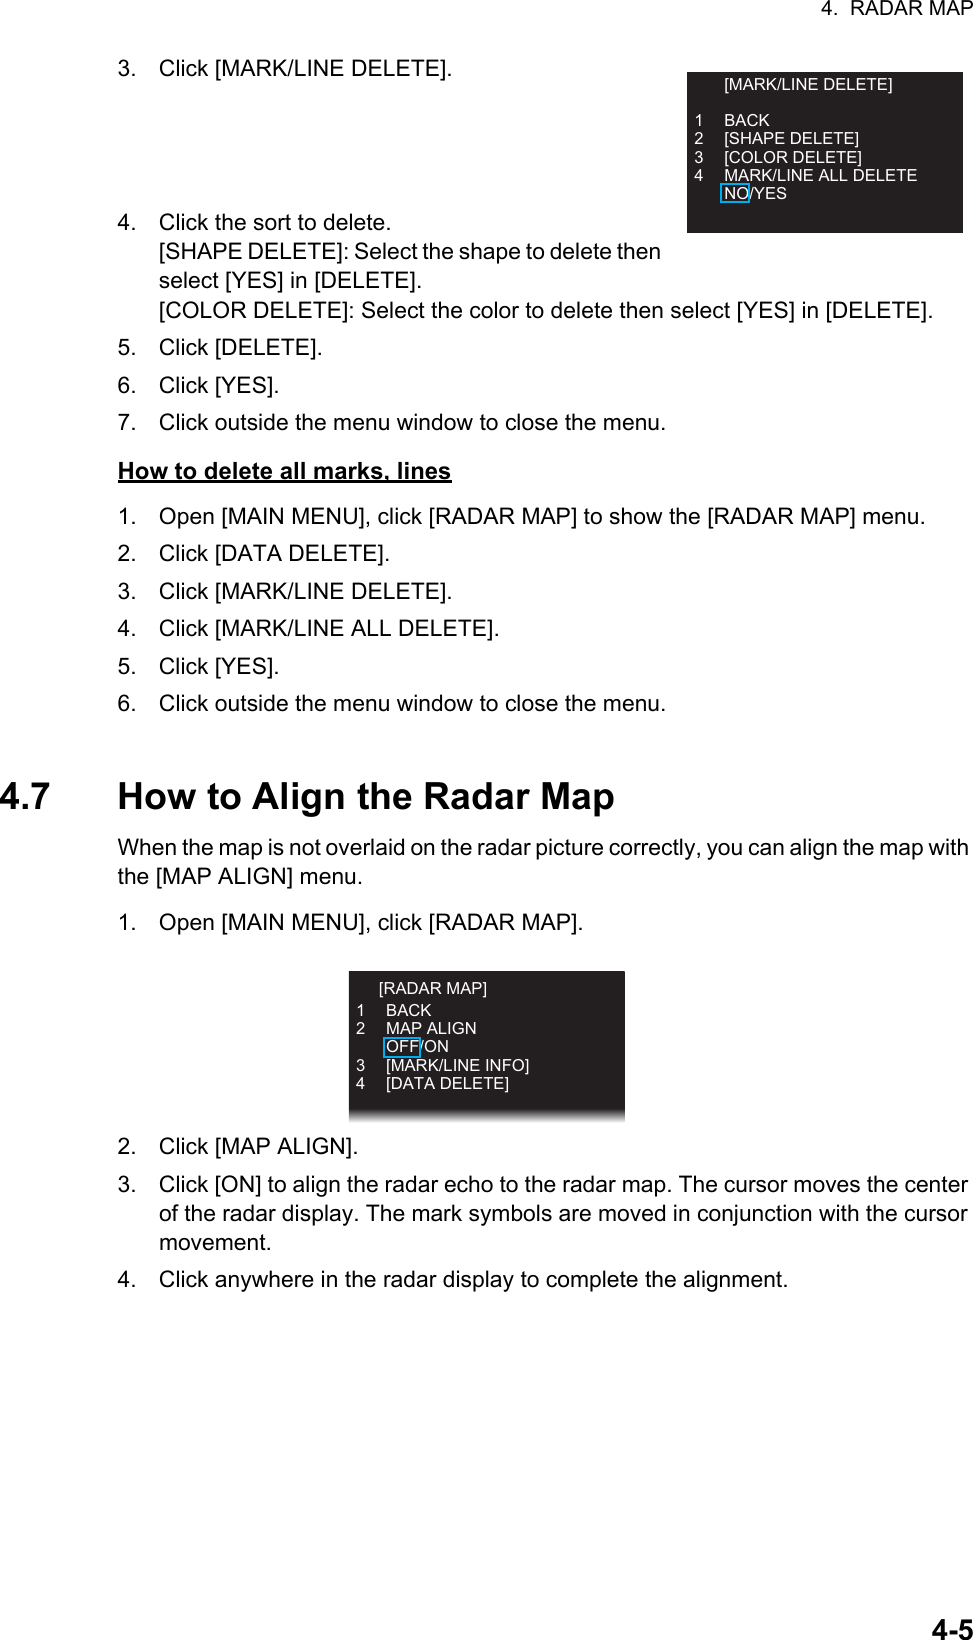 4.  RADAR MAP4-53. Click [MARK/LINE DELETE].4. Click the sort to delete. [SHAPE DELETE]: Select the shape to delete then select [YES] in [DELETE].[COLOR DELETE]: Select the color to delete then select [YES] in [DELETE].5. Click [DELETE].6. Click [YES].7. Click outside the menu window to close the menu.How to delete all marks, lines1. Open [MAIN MENU], click [RADAR MAP] to show the [RADAR MAP] menu.2. Click [DATA DELETE].3. Click [MARK/LINE DELETE].4. Click [MARK/LINE ALL DELETE].5. Click [YES].6. Click outside the menu window to close the menu.4.7 How to Align the Radar MapWhen the map is not overlaid on the radar picture correctly, you can align the map with the [MAP ALIGN] menu. 1. Open [MAIN MENU], click [RADAR MAP].2. Click [MAP ALIGN].3. Click [ON] to align the radar echo to the radar map. The cursor moves the center of the radar display. The mark symbols are moved in conjunction with the cursor movement.4. Click anywhere in the radar display to complete the alignment. [MARK/LINE DELETE]1 BACK2 [SHAPE DELETE]3 [COLOR DELETE]4  MARK/LINE ALL DELETE NO/YES 1 BACK2 MAP ALIGN OFF/ON3 [MARK/LINE INFO]4 [DATA DELETE]  [RADAR MAP]